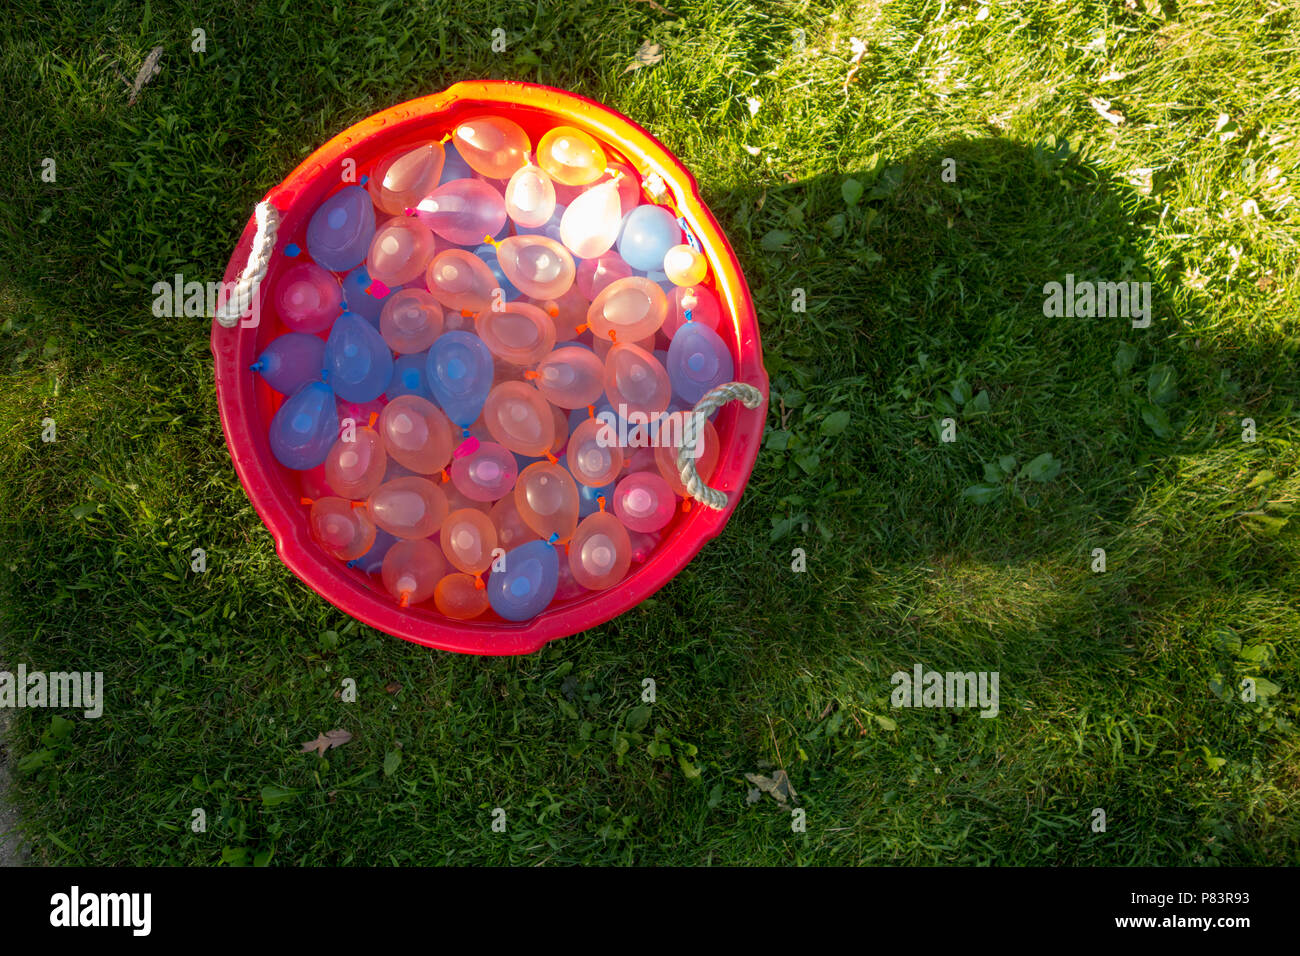 A tub full of water balloons ready for summer fun Stock Photo